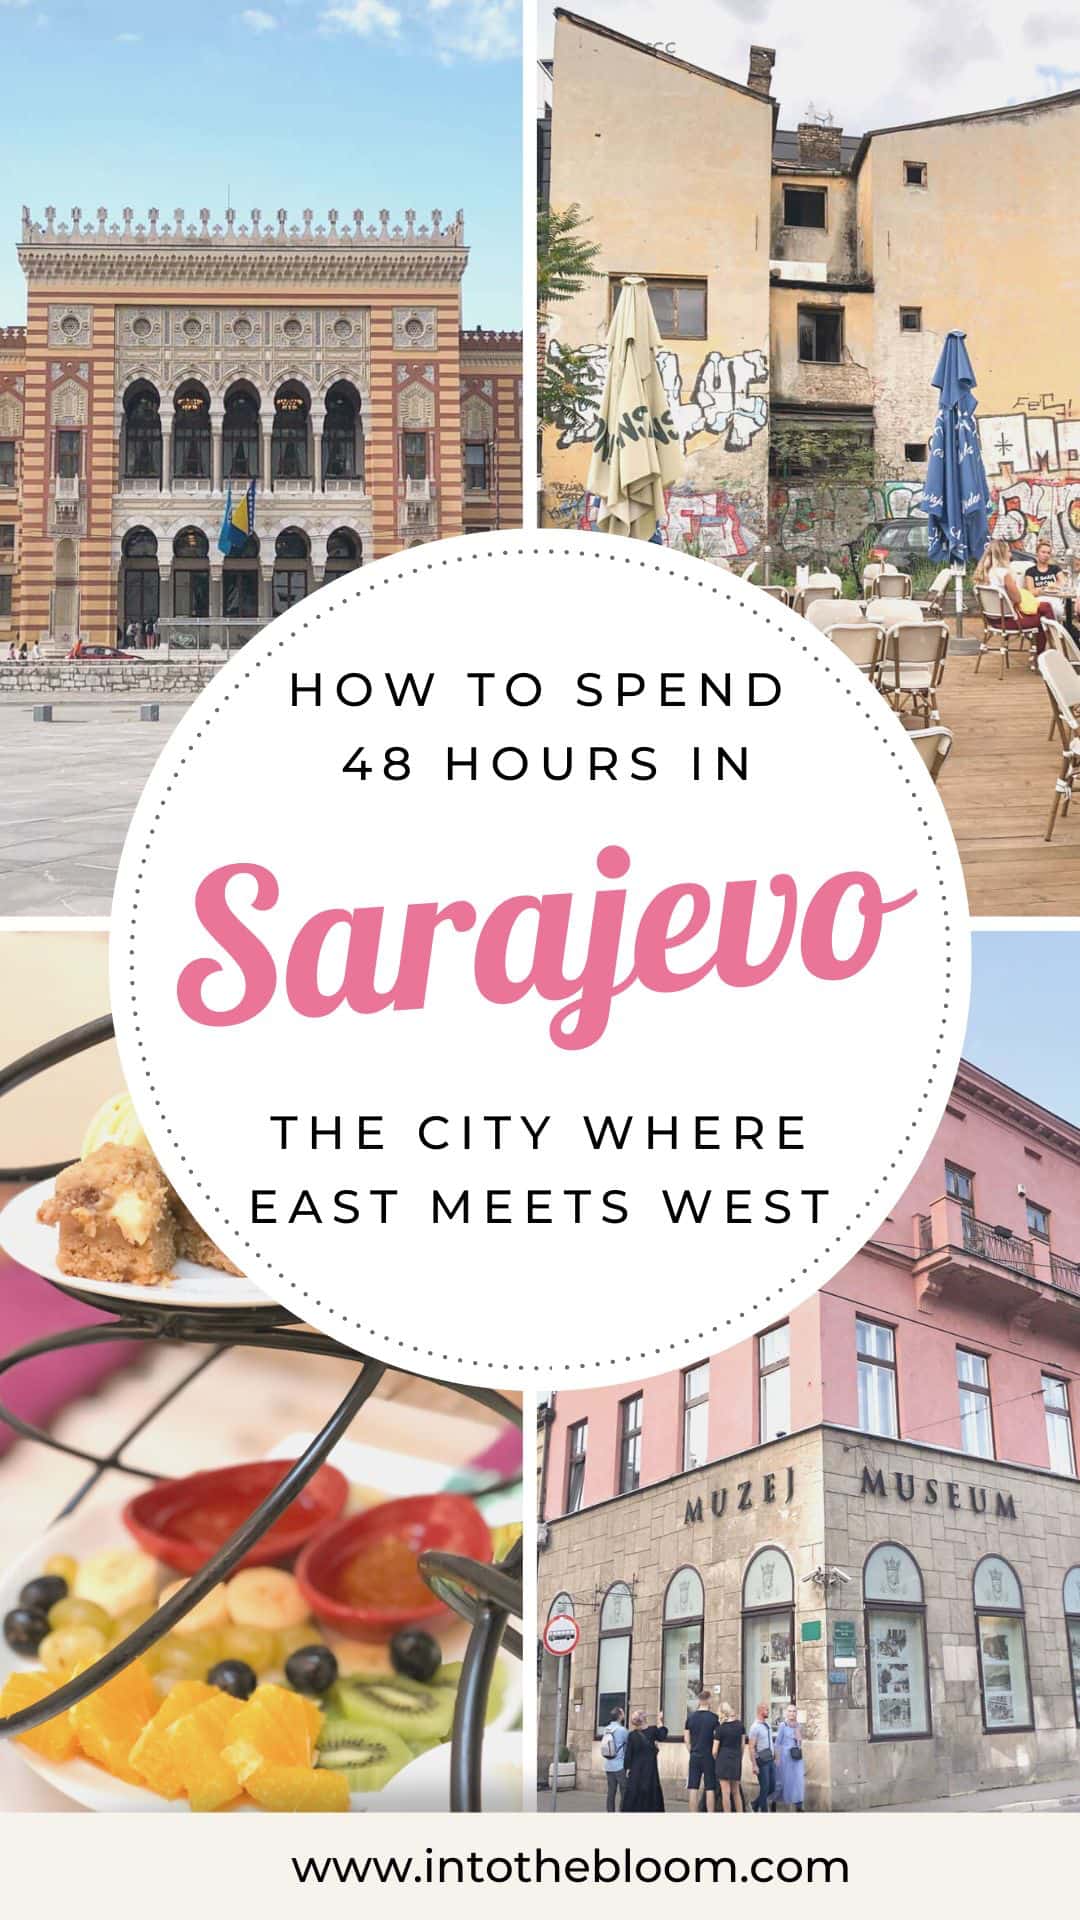 Sarajevo Travel Guide - Best things to do in Sarajevo, the city where East meets West